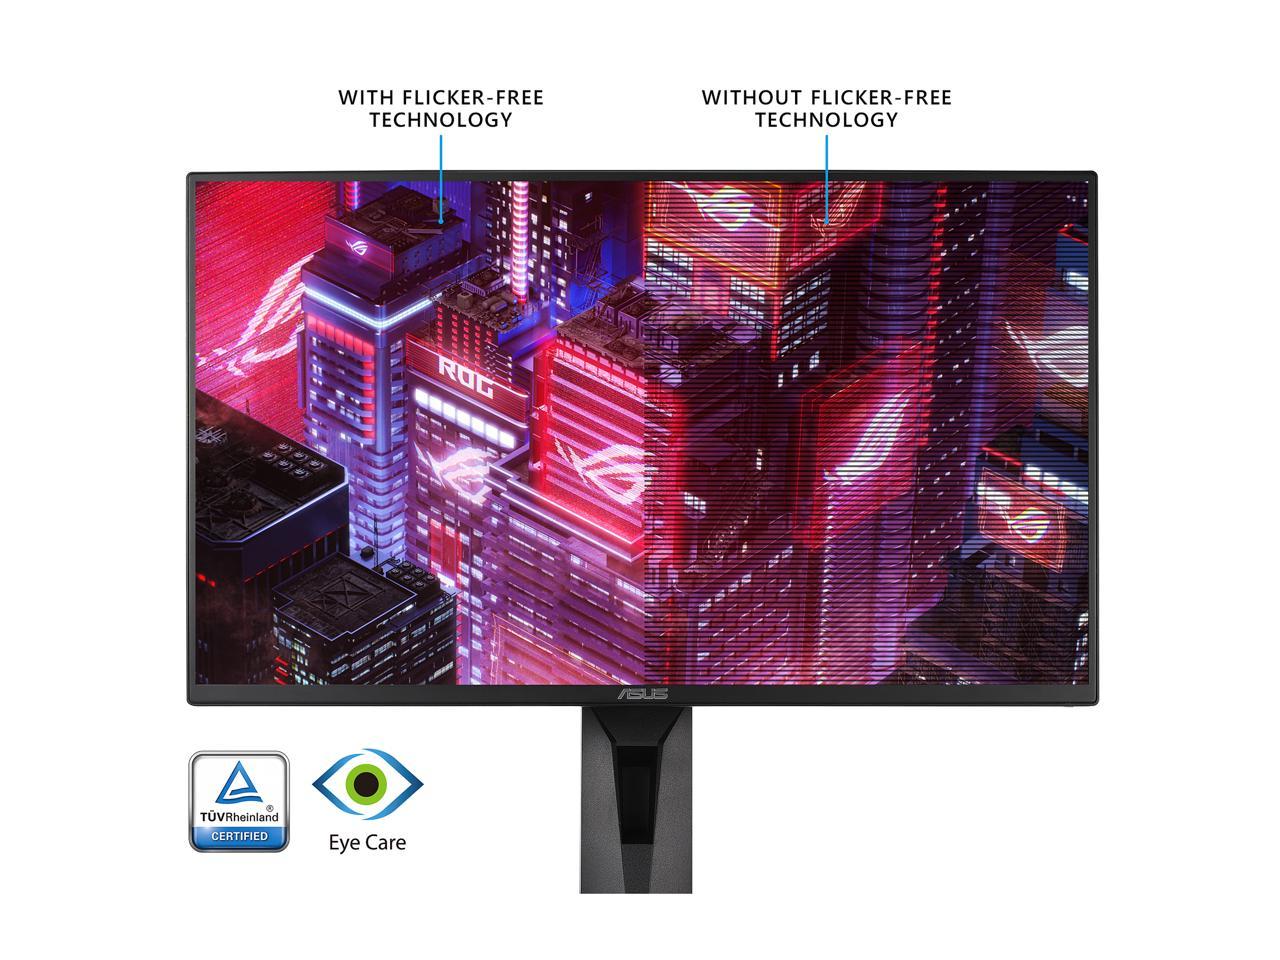 ASUS VG258QR 25" (Actual size 24.5") Full HD 1920 x 1080 up to 0.5ms (GTG) 165Hz DVI-D HDMI DisplayPort G-SYNC Compatible Asus Eye Care with Ultra Low-Blue Light & Flicker-Free Gaming Monitor